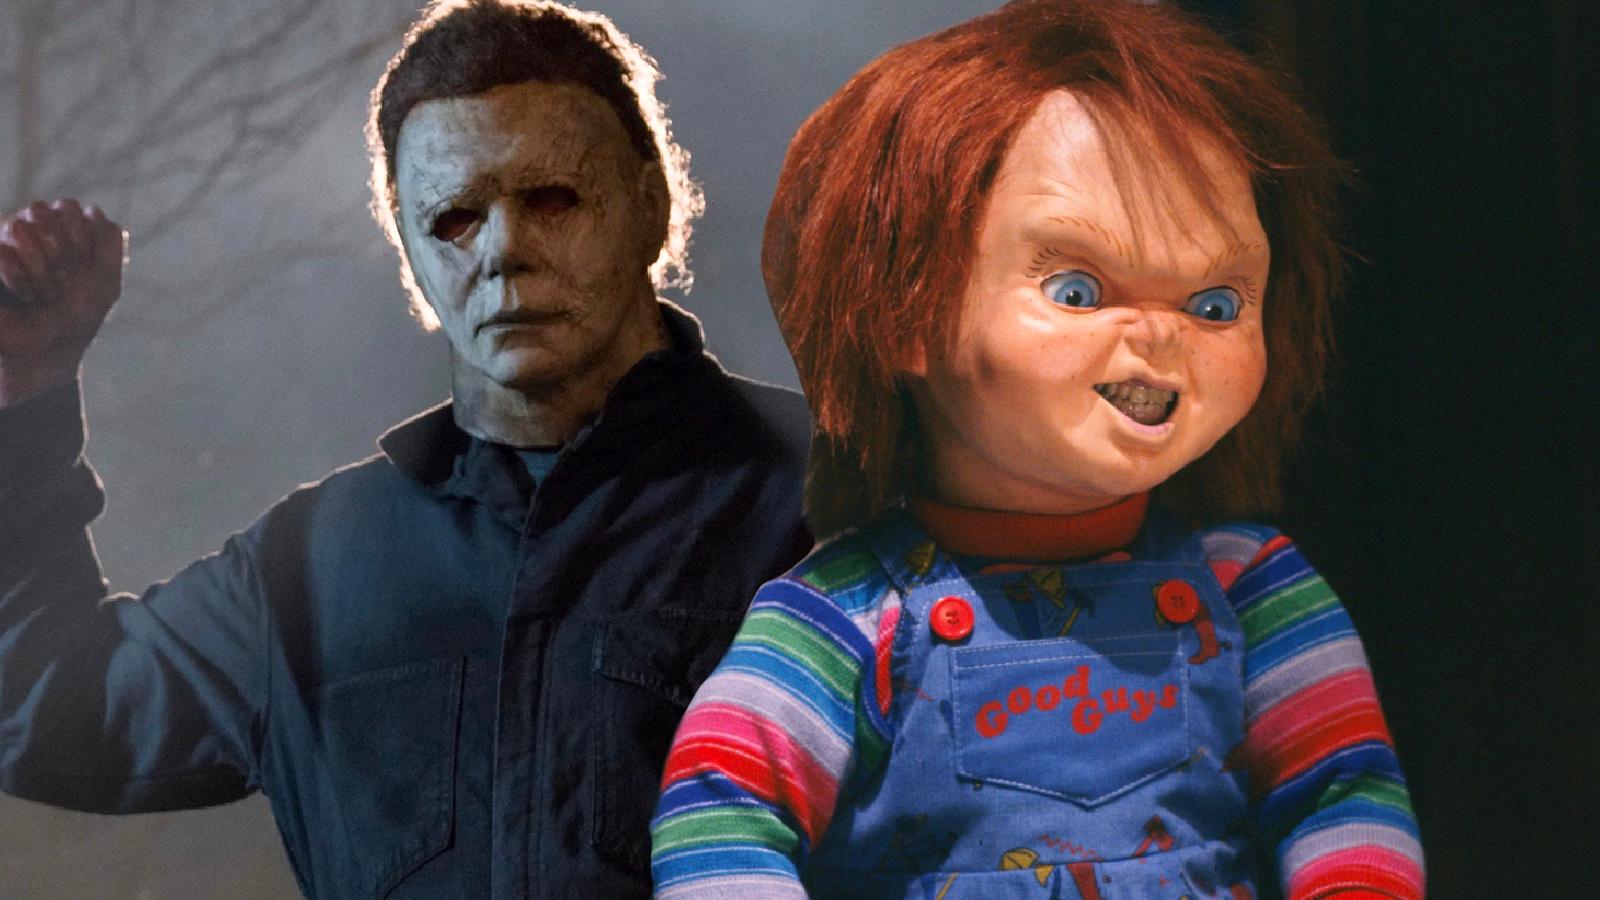 Michale Myers from Halloween and Chucky from Child's Play